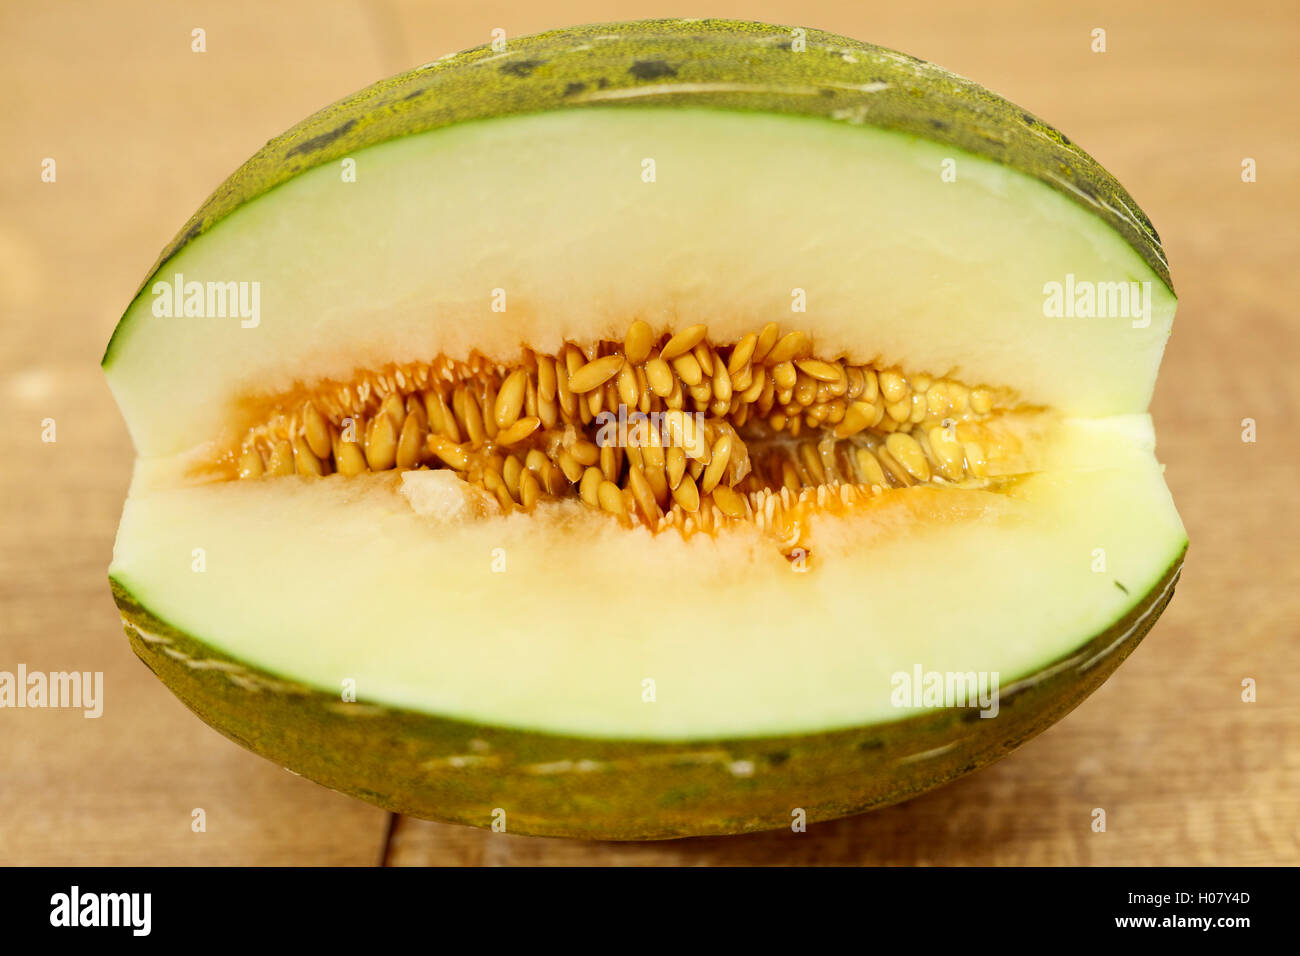 Toad skin melon halved on a wooden table. Stock Photo